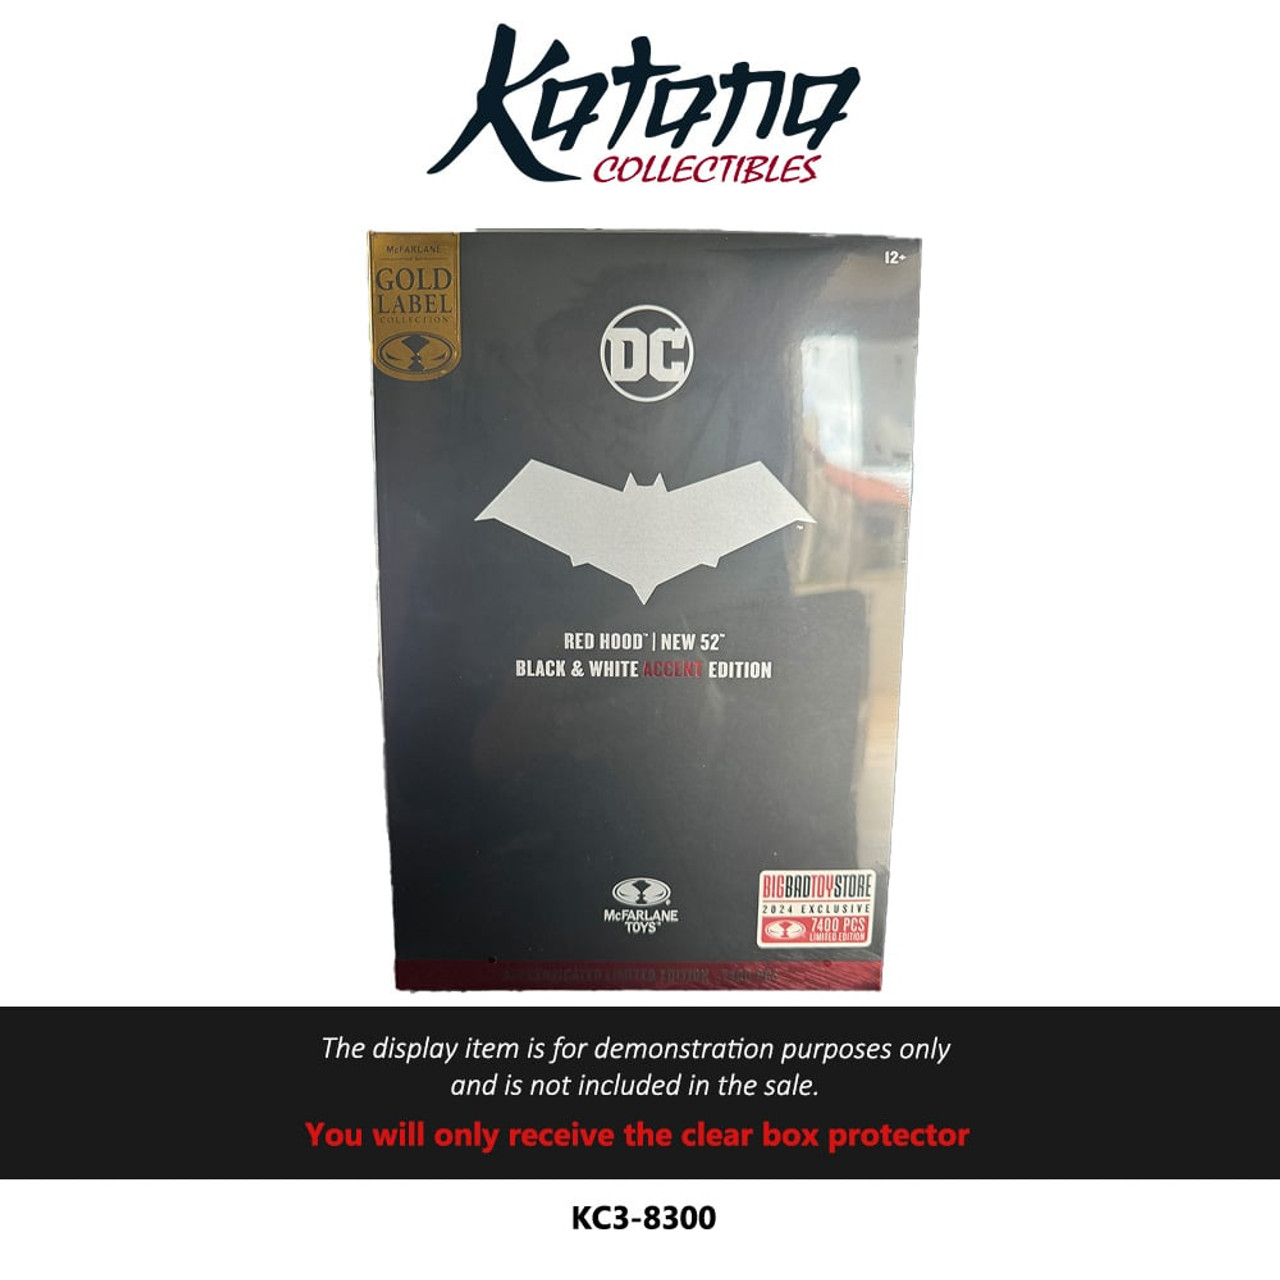 Katana Collectibles Protector For Red Hood Bbts Exclusive Limited Black & White 52 Dc Multiverse Mcfarlane